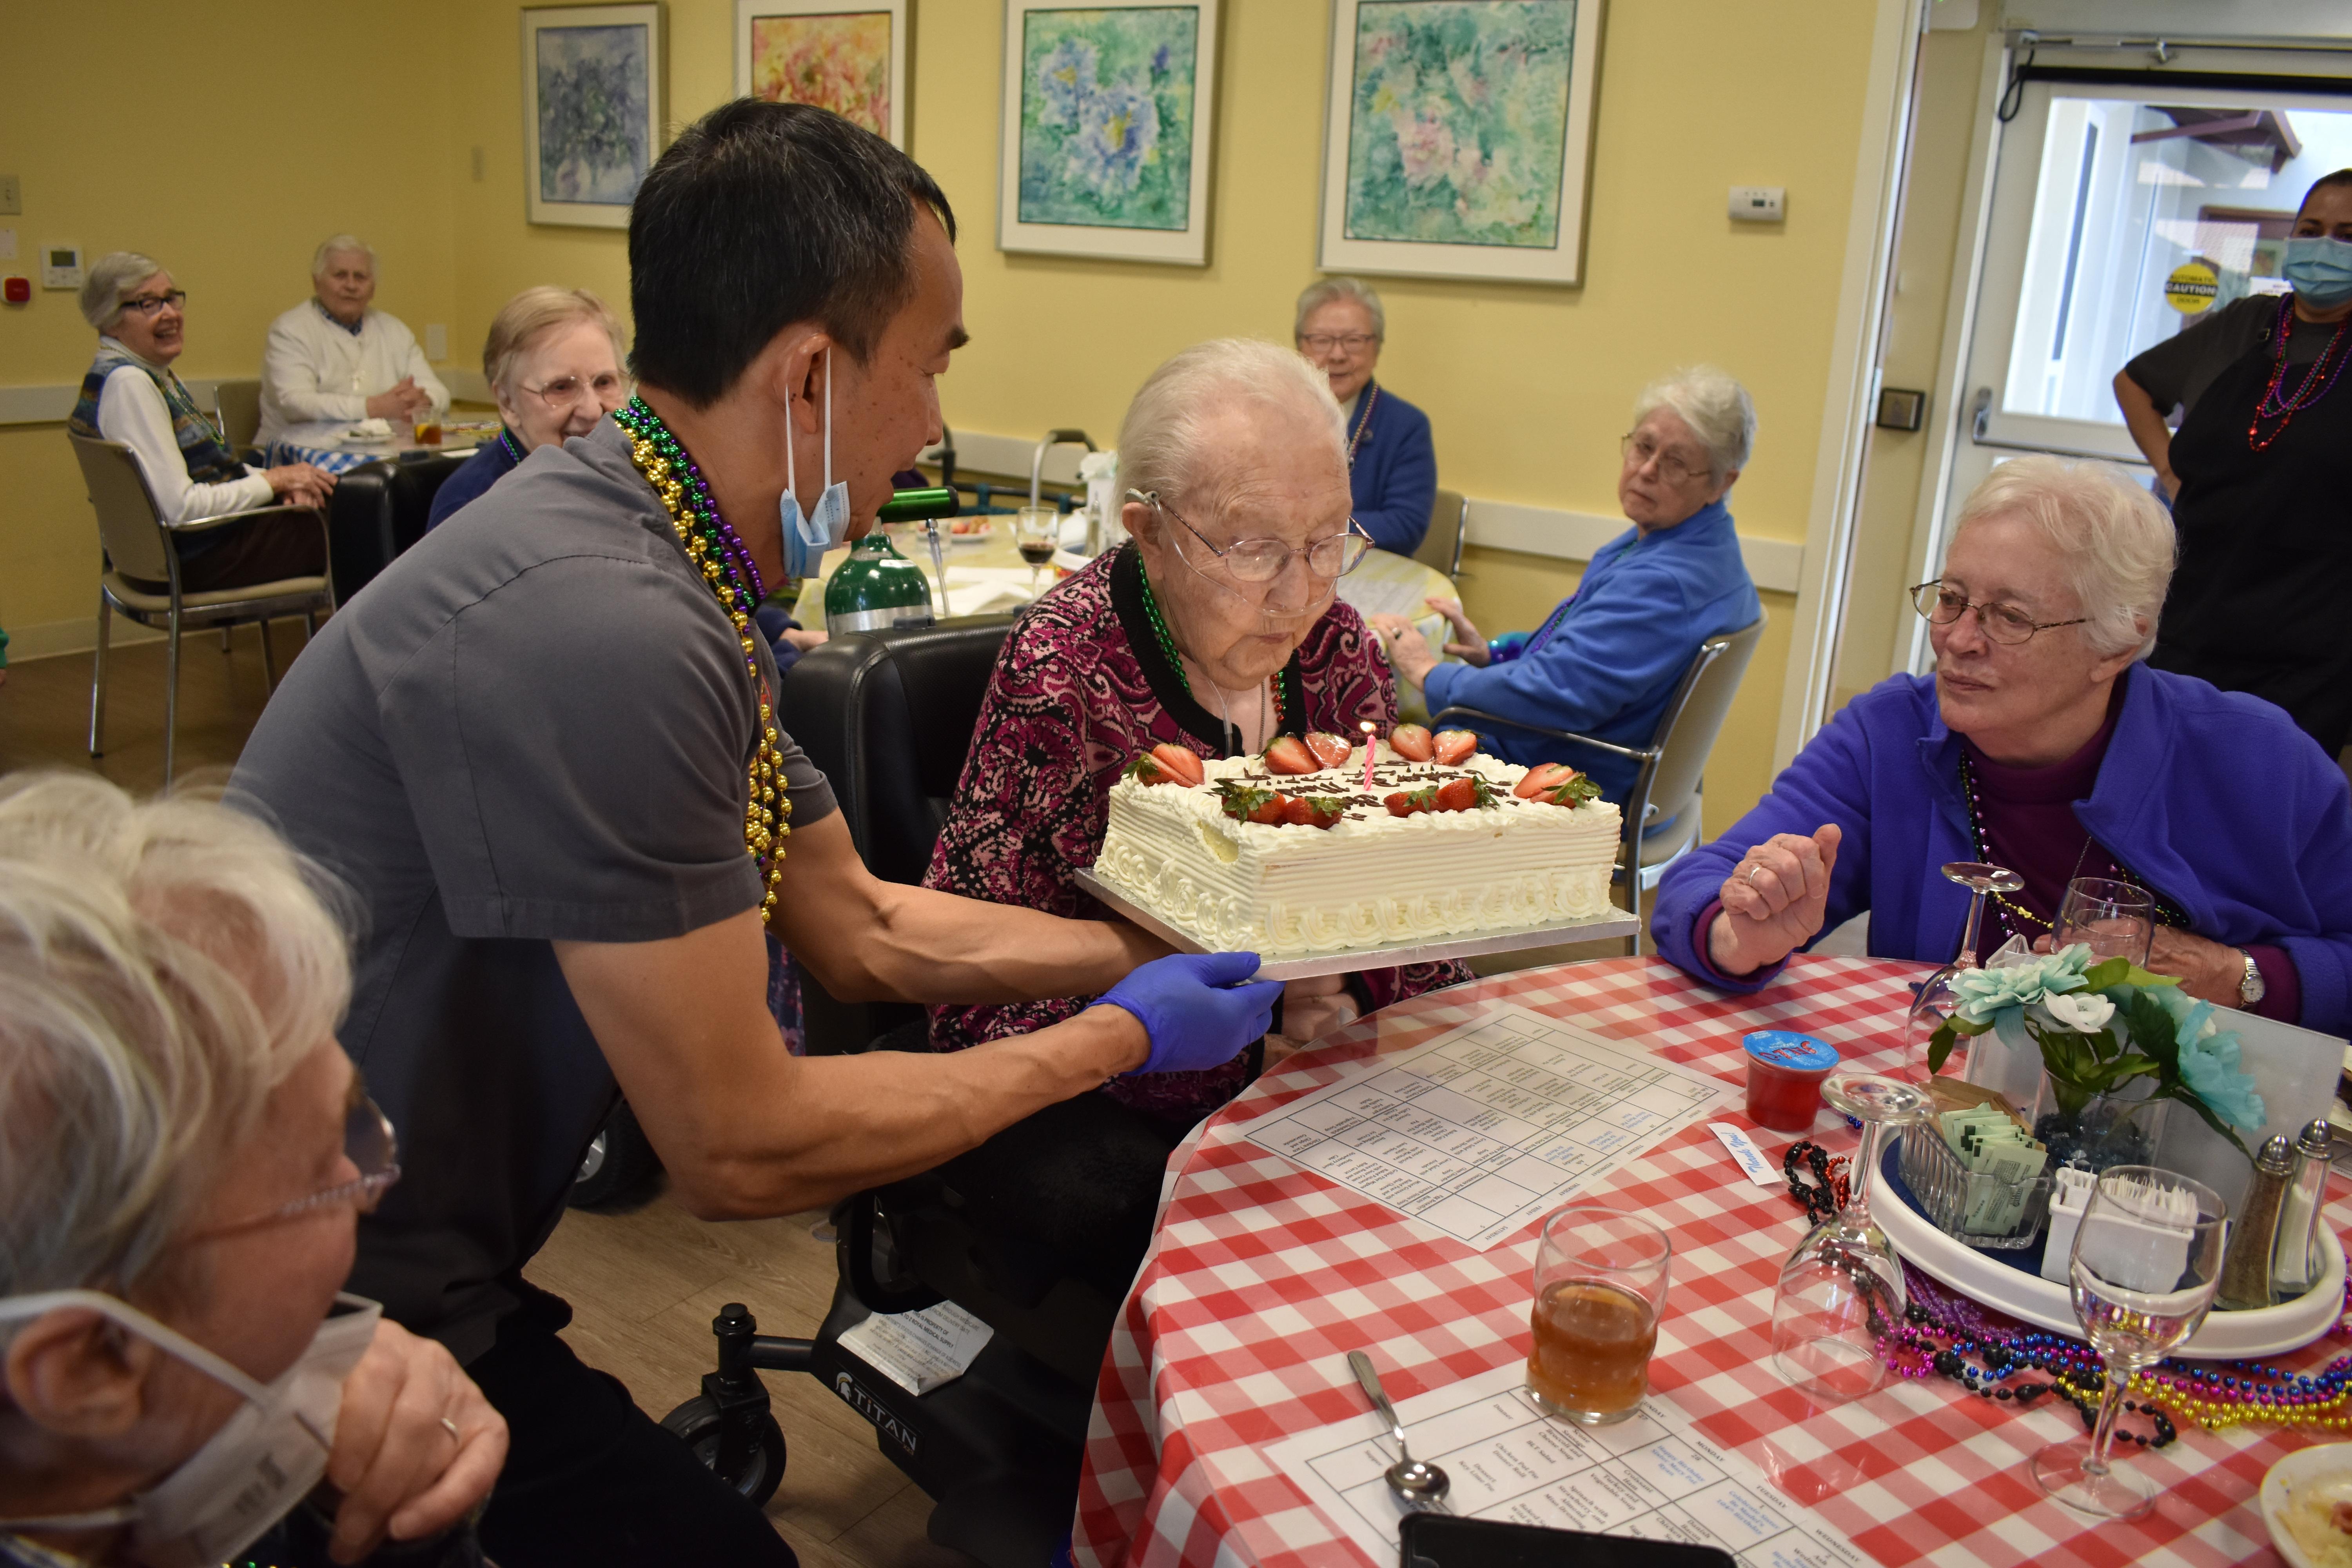 The late Sister Mardel celebrating her 104th birthday in March 2022 with  RSCJ and staff at Oakwood.